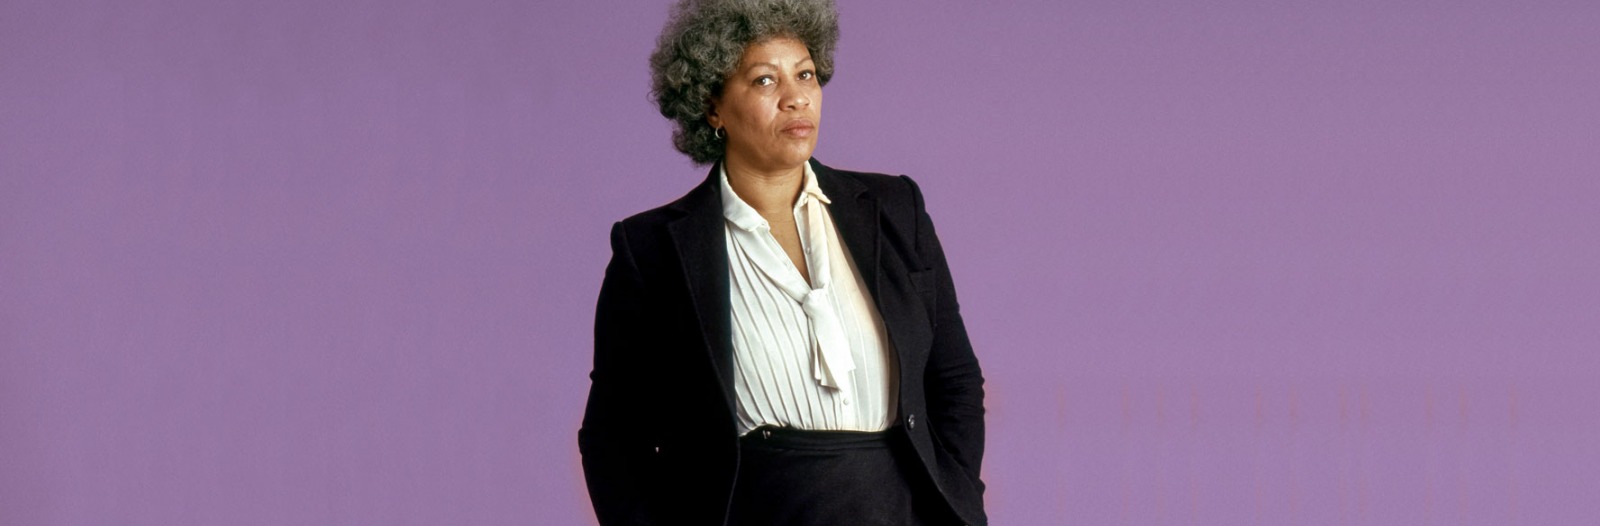 Toni Morrison in suit with purple background